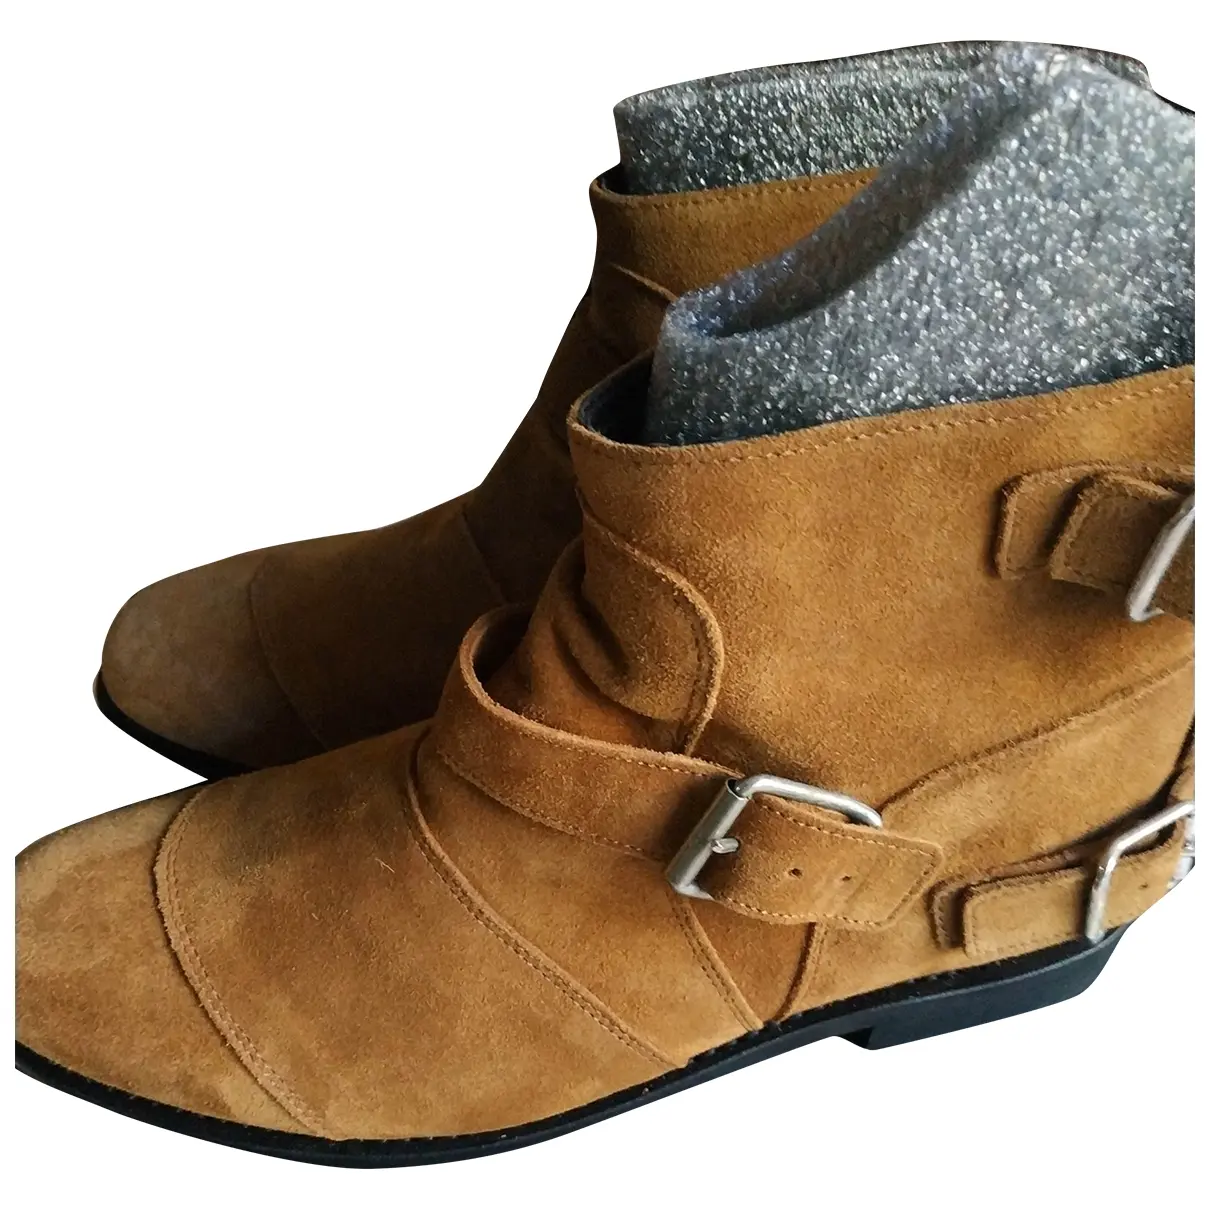 Balmain For H&M Camel Suede Boots for sale